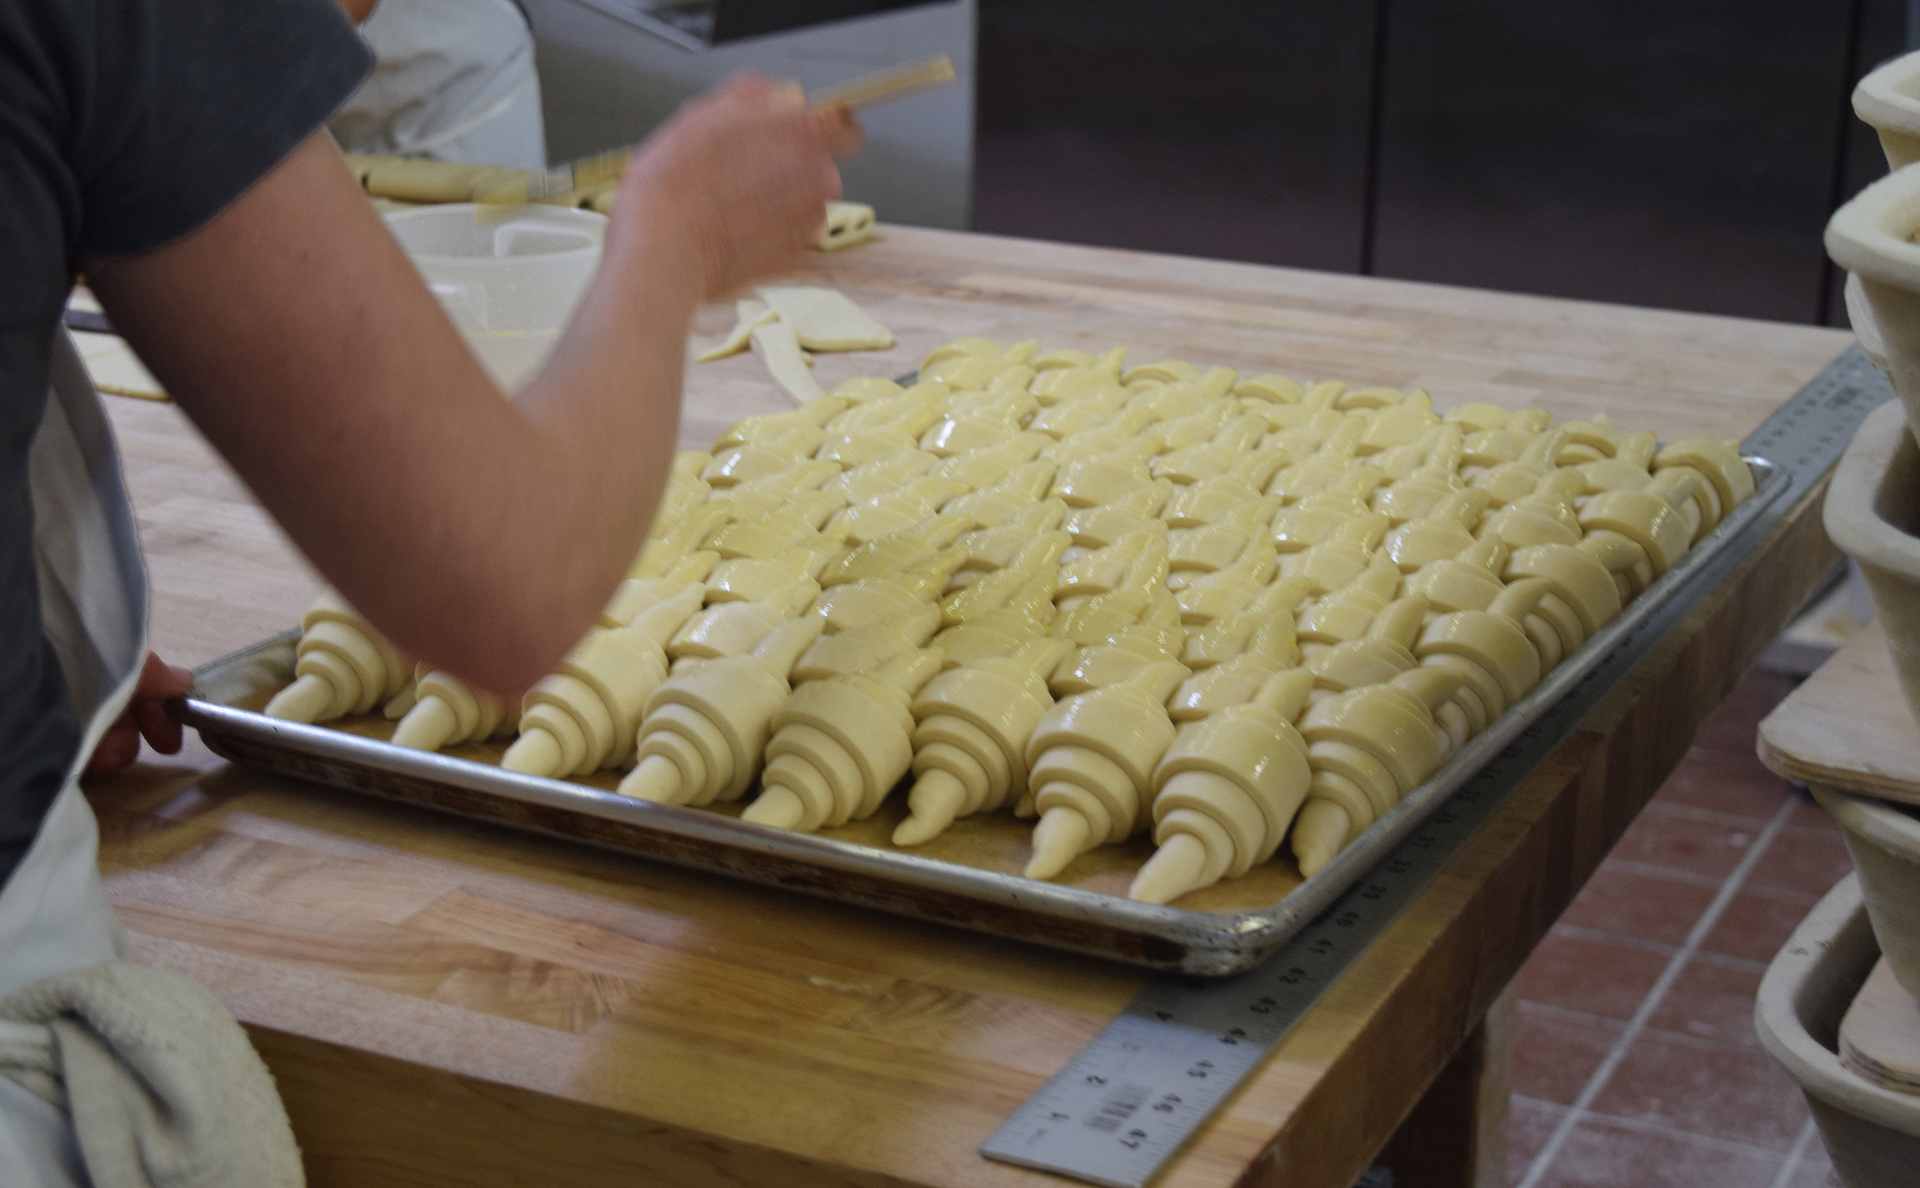 Picture-perfect croissants are buttered before baking. About 70% of bakery revenues currently come from pastries.